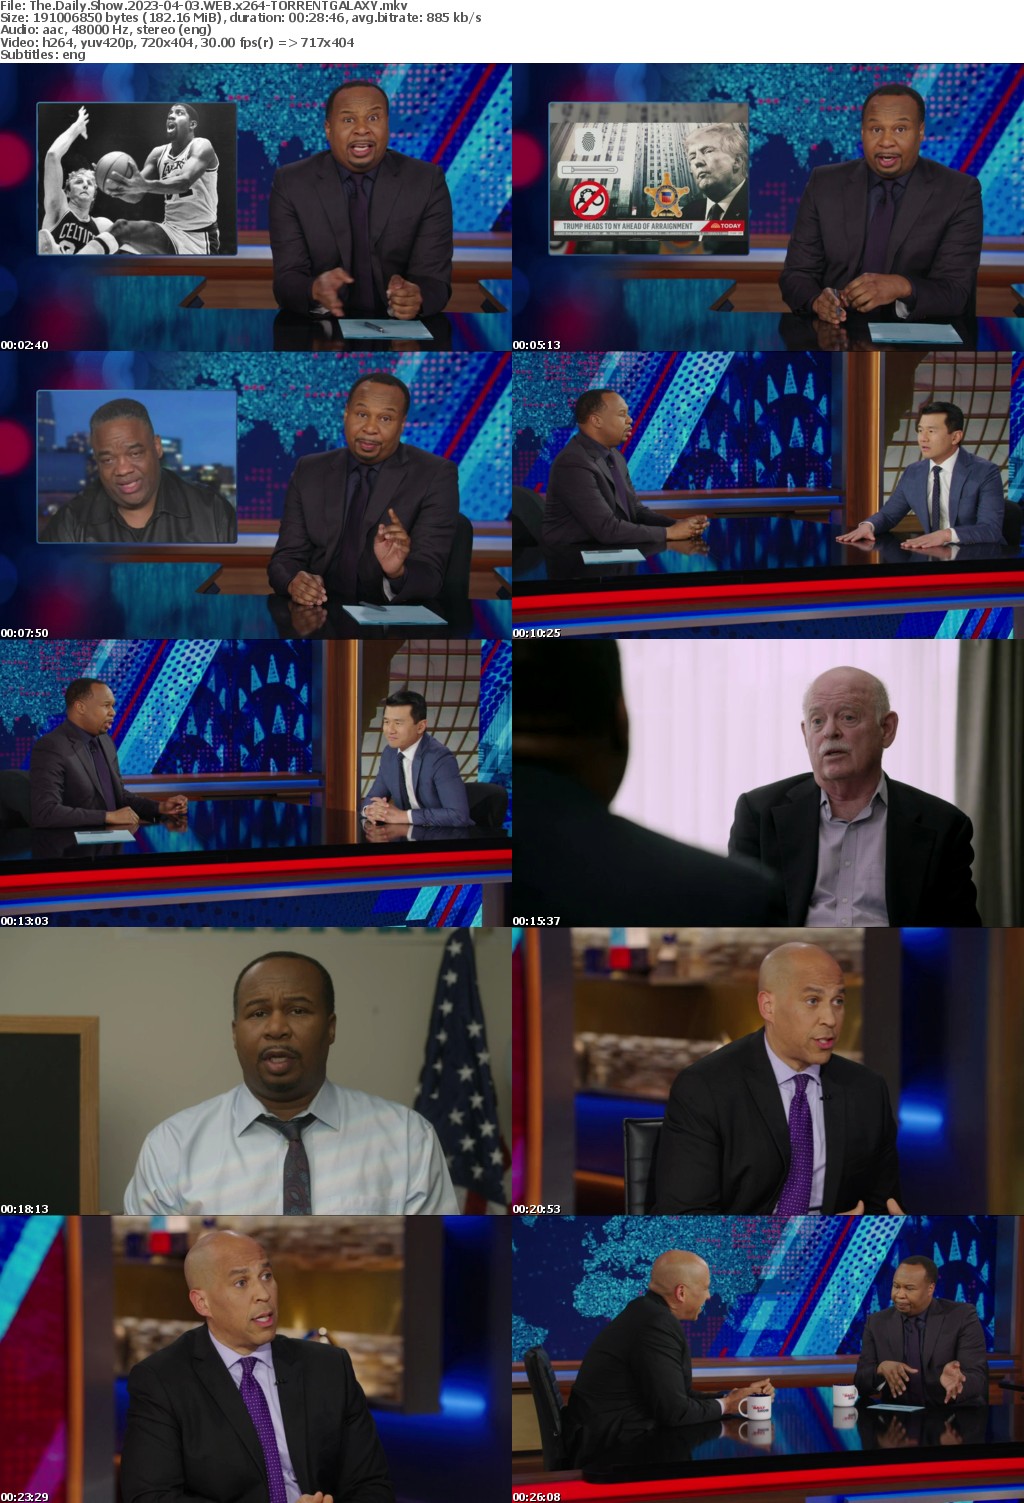 The Daily Show 2023-04-03 WEB x264-GALAXY